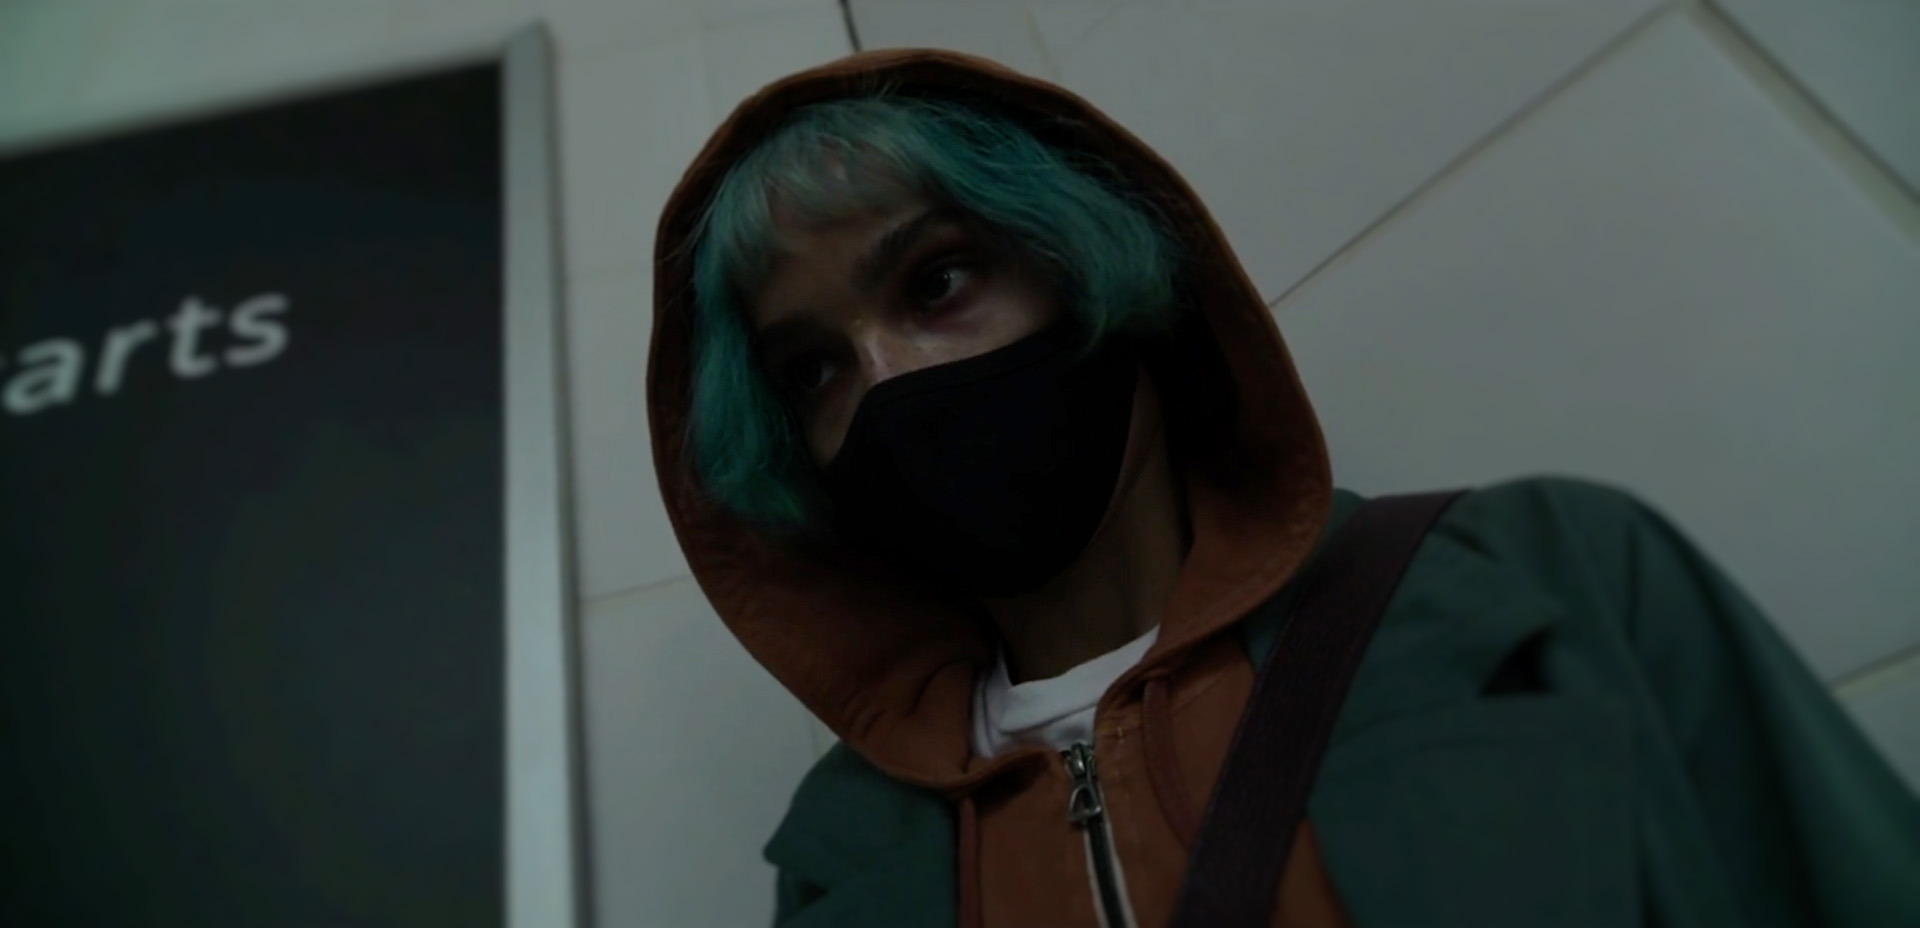 Angela (Zoe Kravitz) with her back to a train station wall, mask on, hood up.